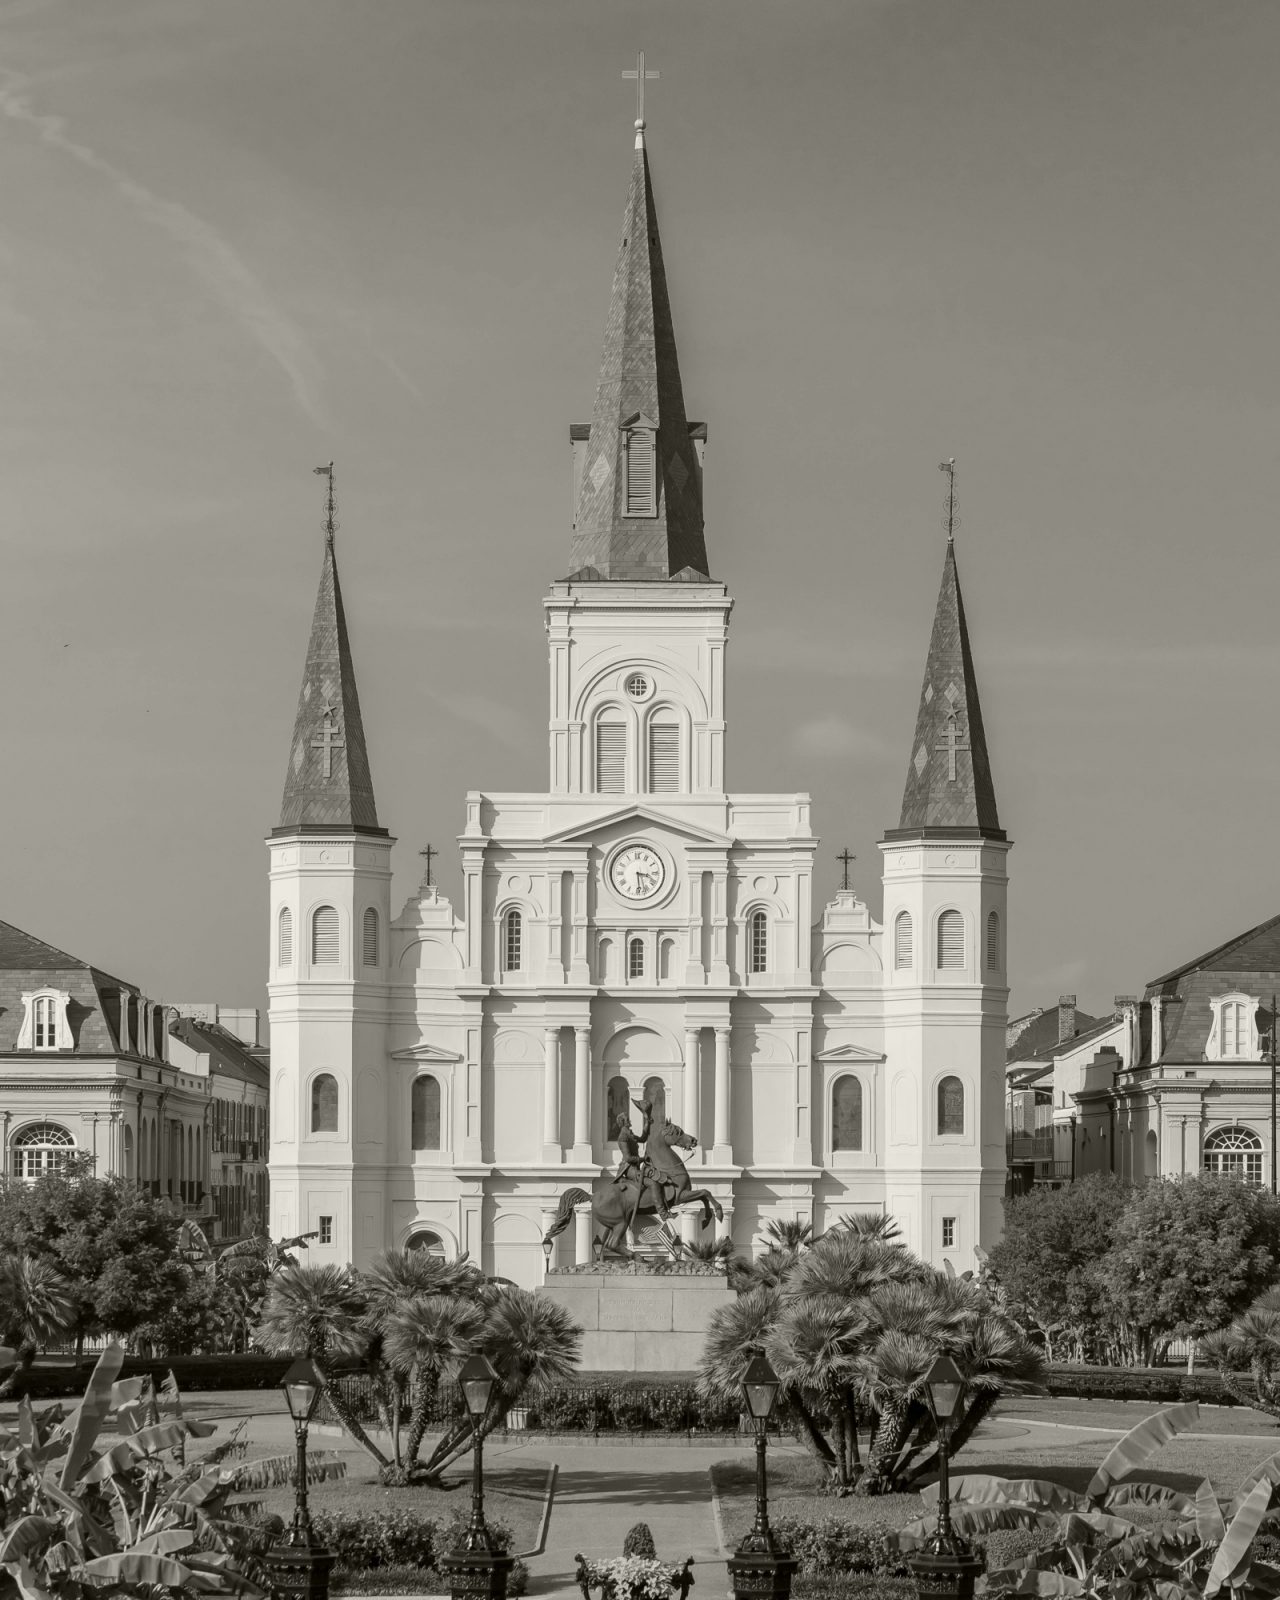 Black and white picture of the St. Louis Cathedral in New Orleans